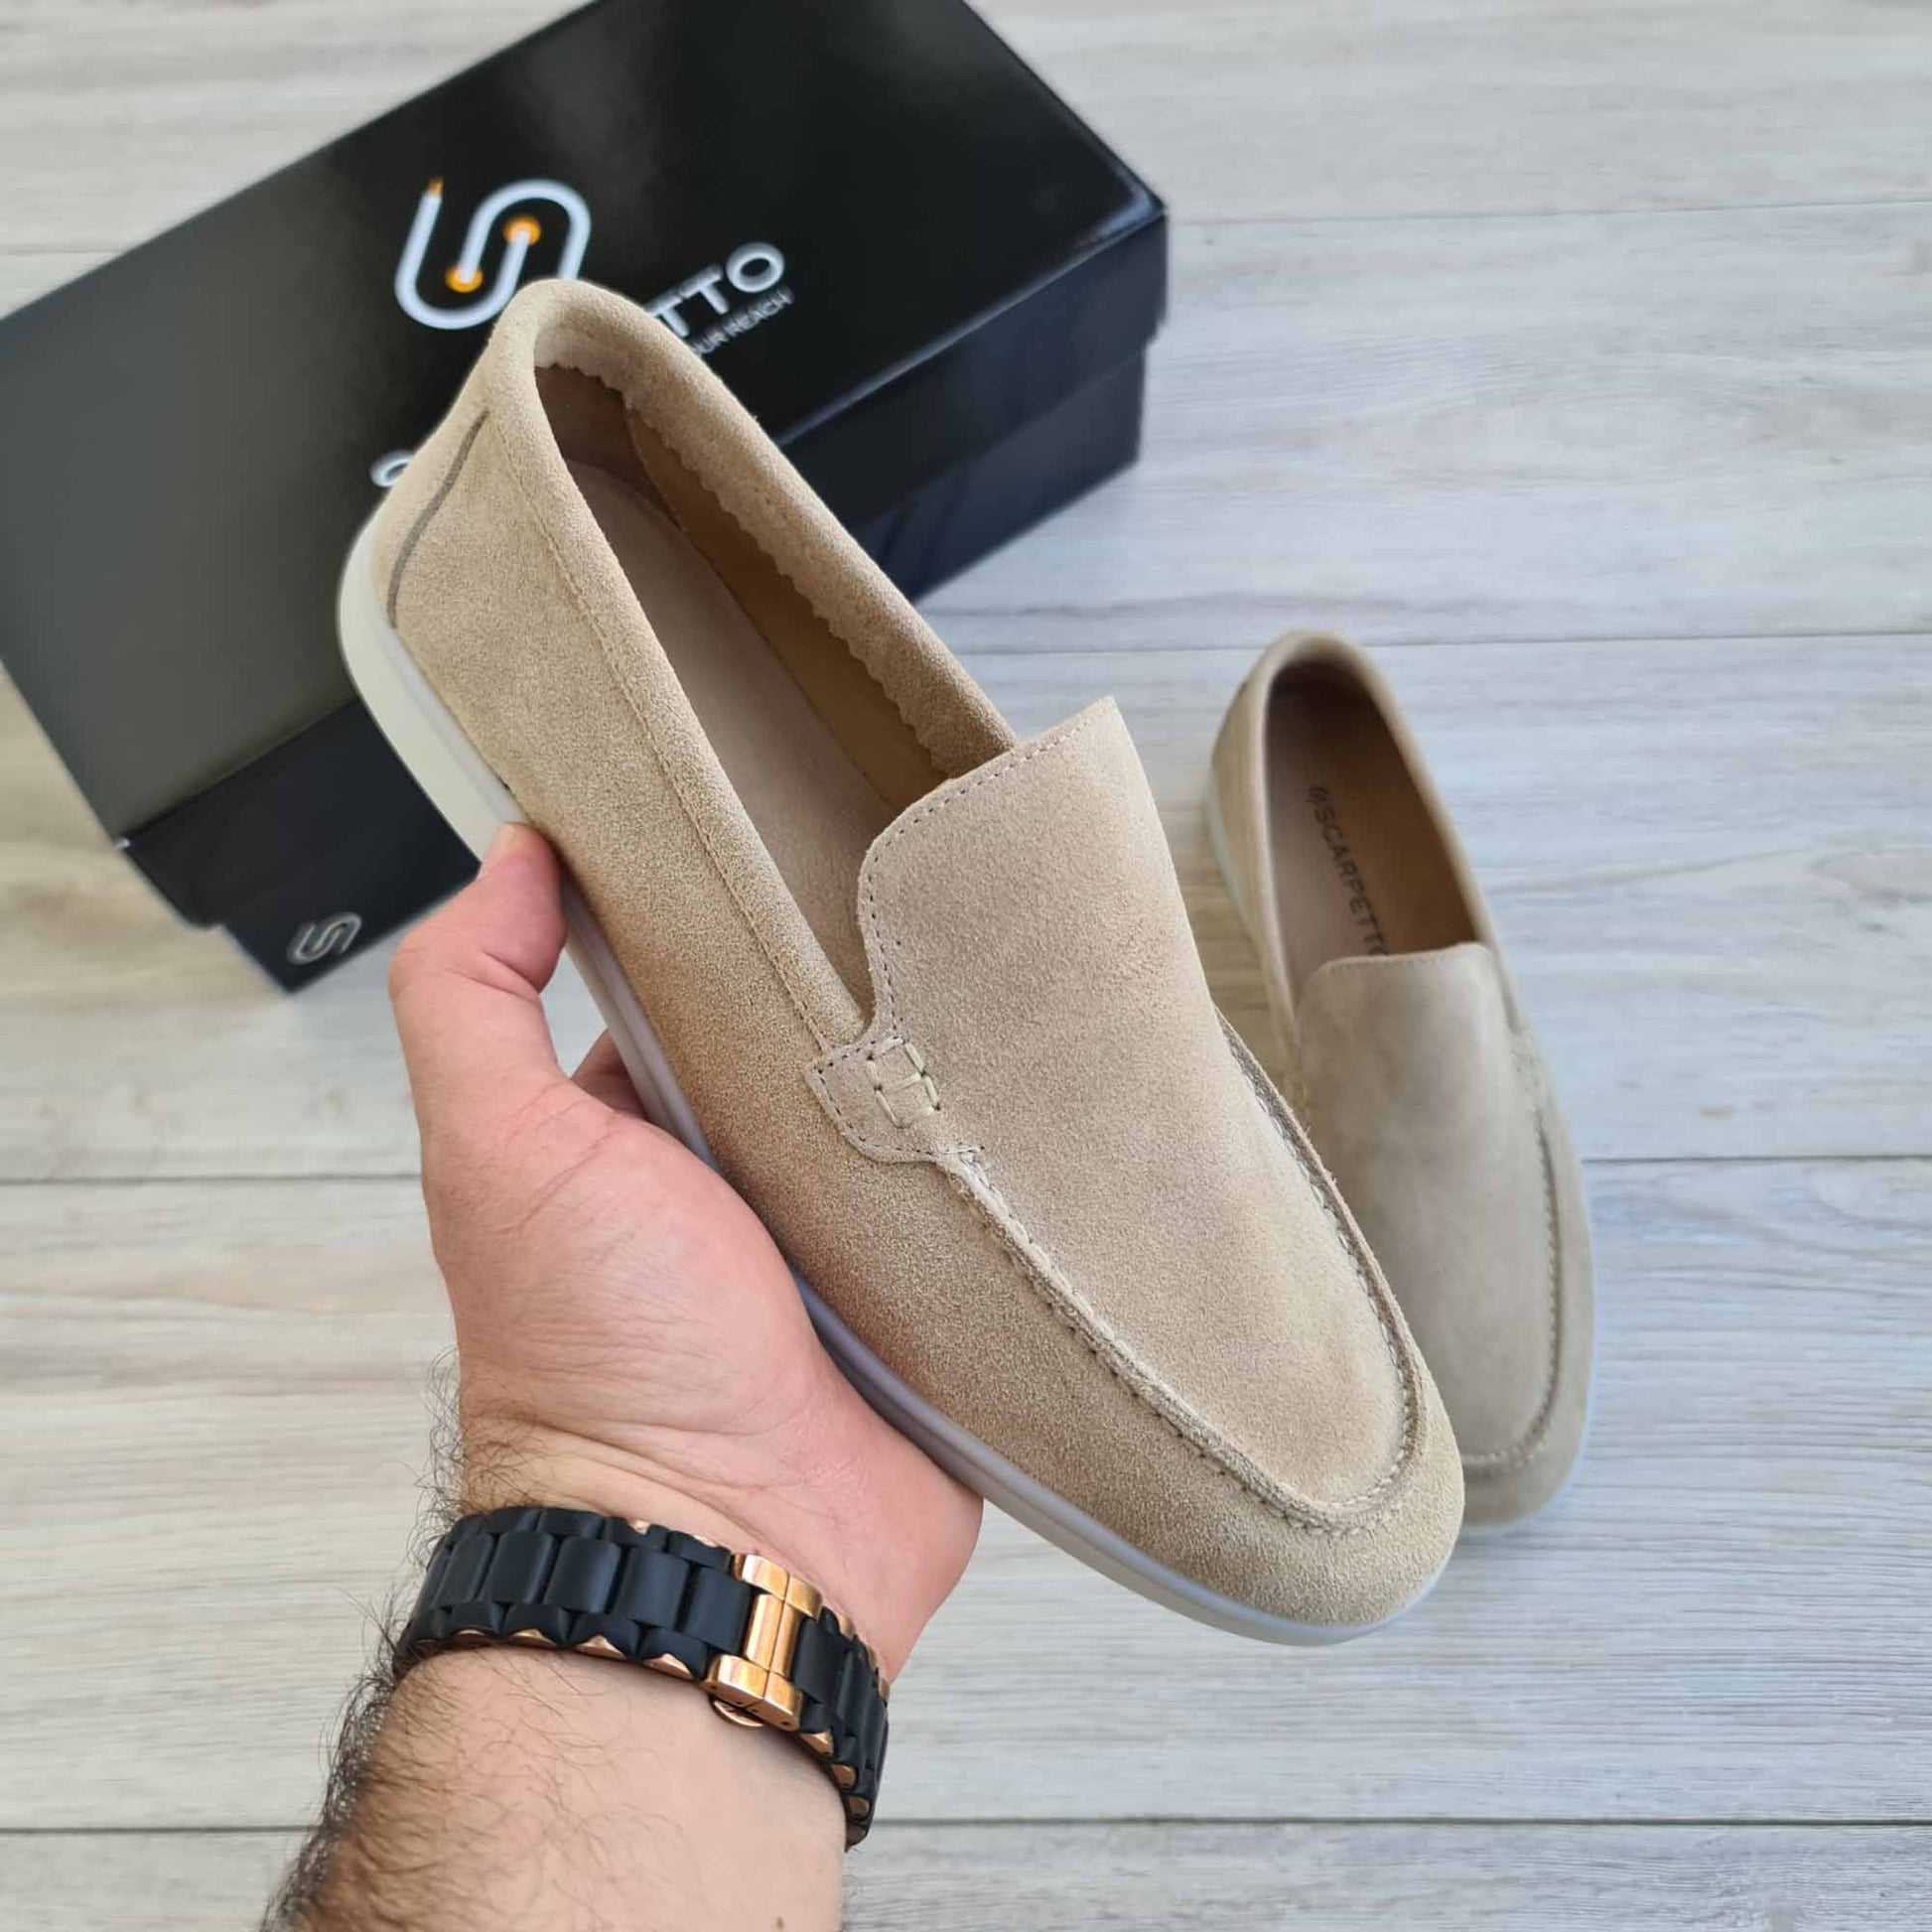 Men's Suede Leather Loafers - White Sole